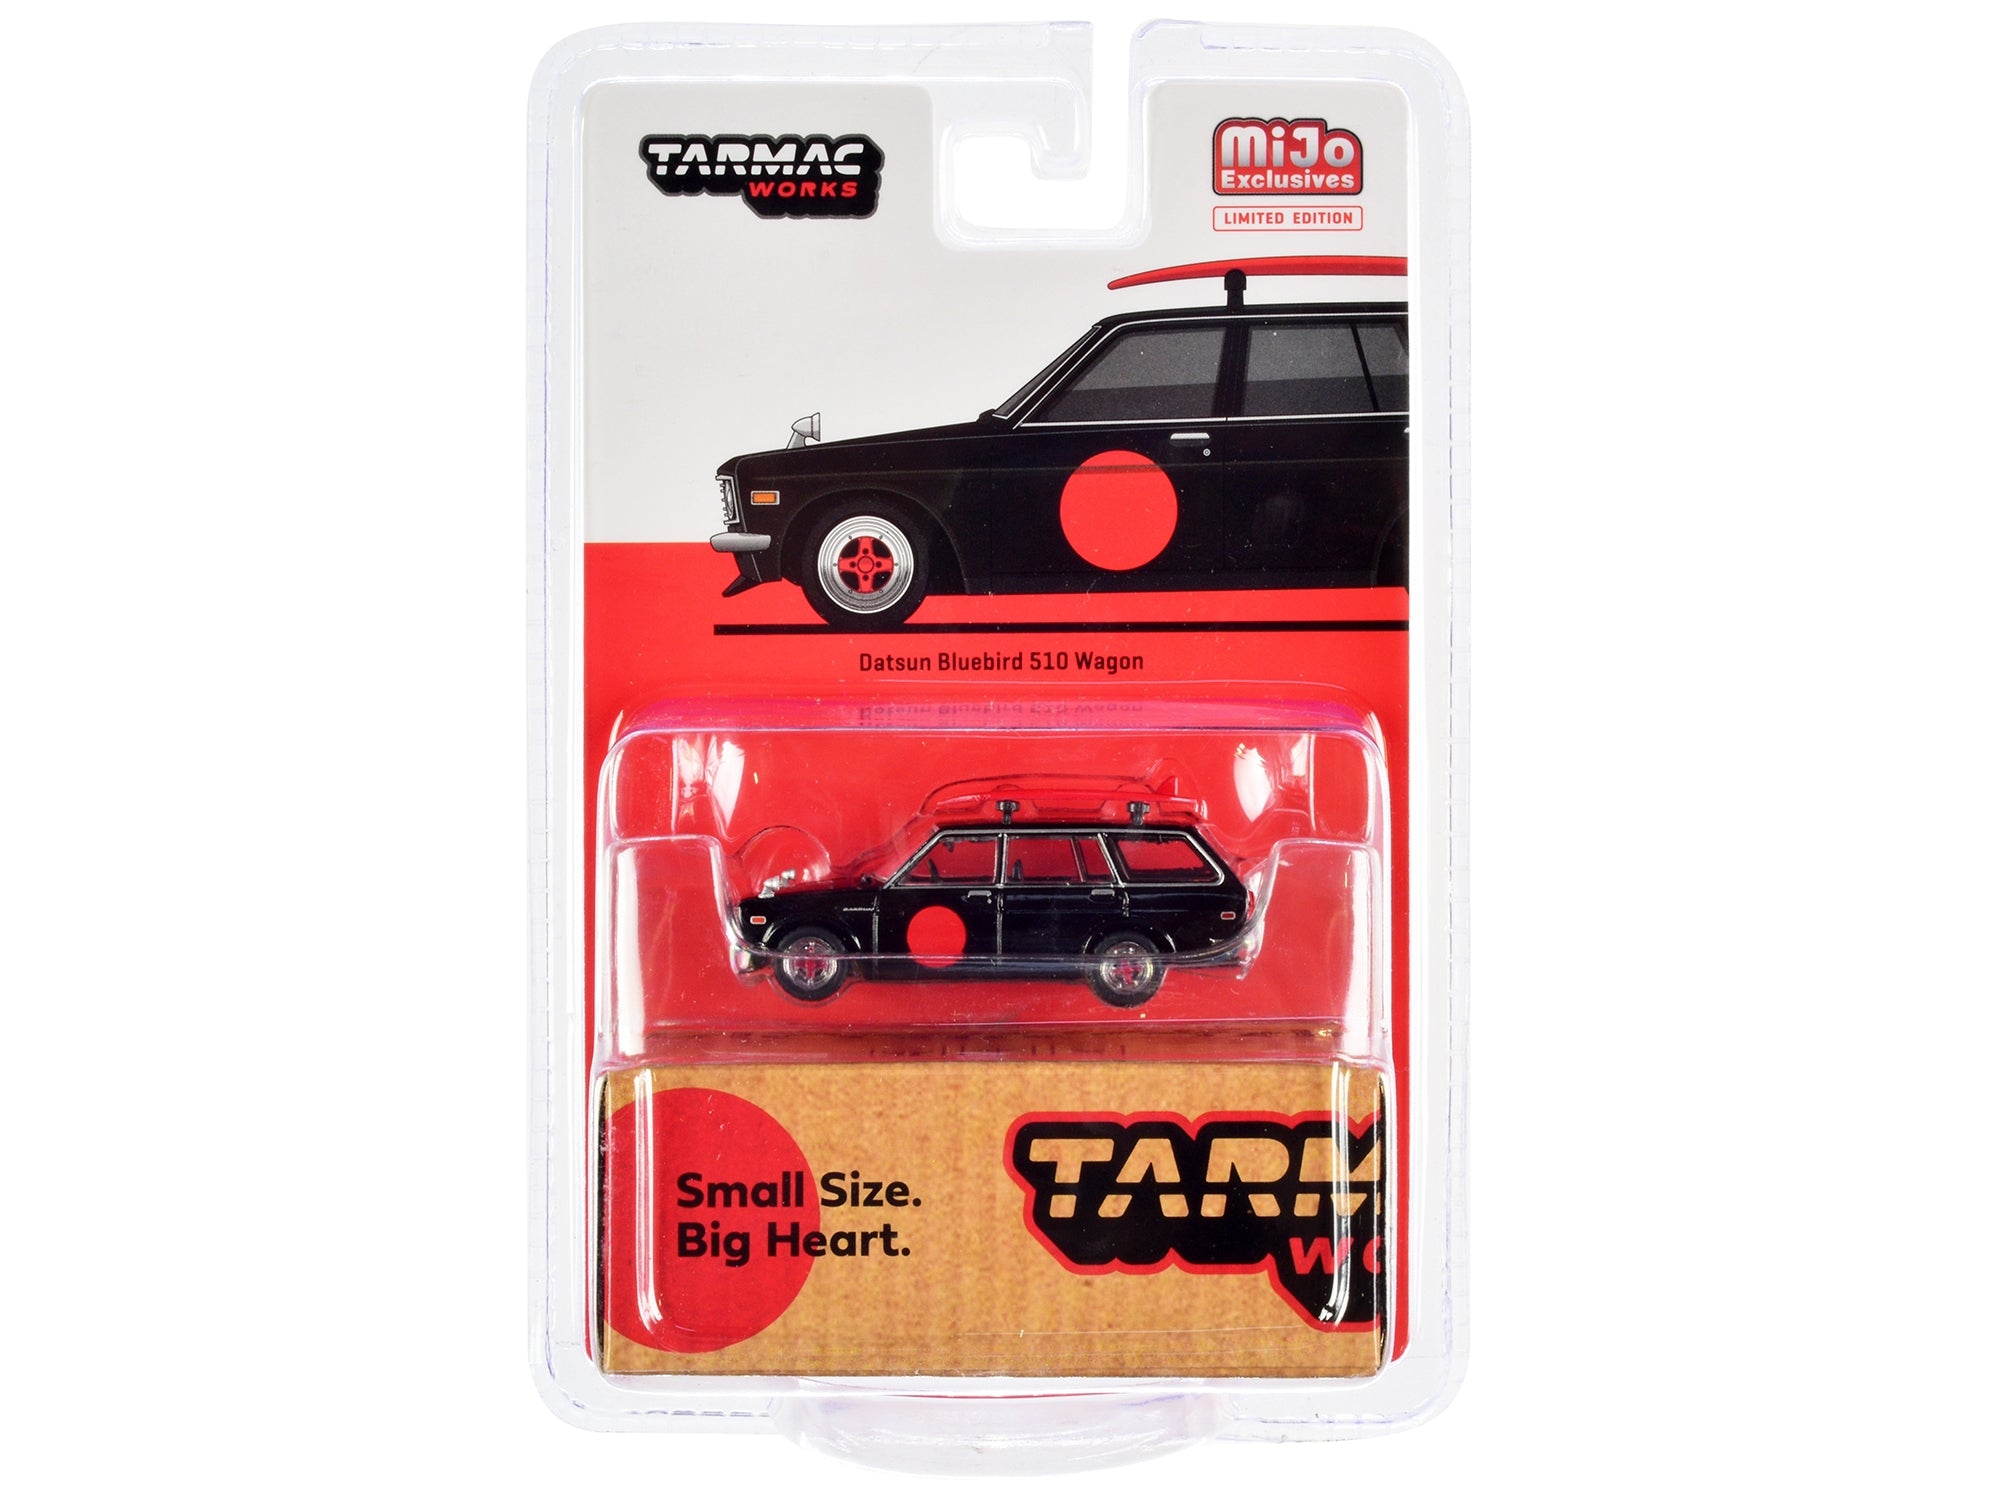 Datsun Bluebird 510 Wagon Black with Red Graphics with Roof Rack and Surfboard "Global64" Series 1/64 Diecast Model Car by Tarmac Works Tarmac Works